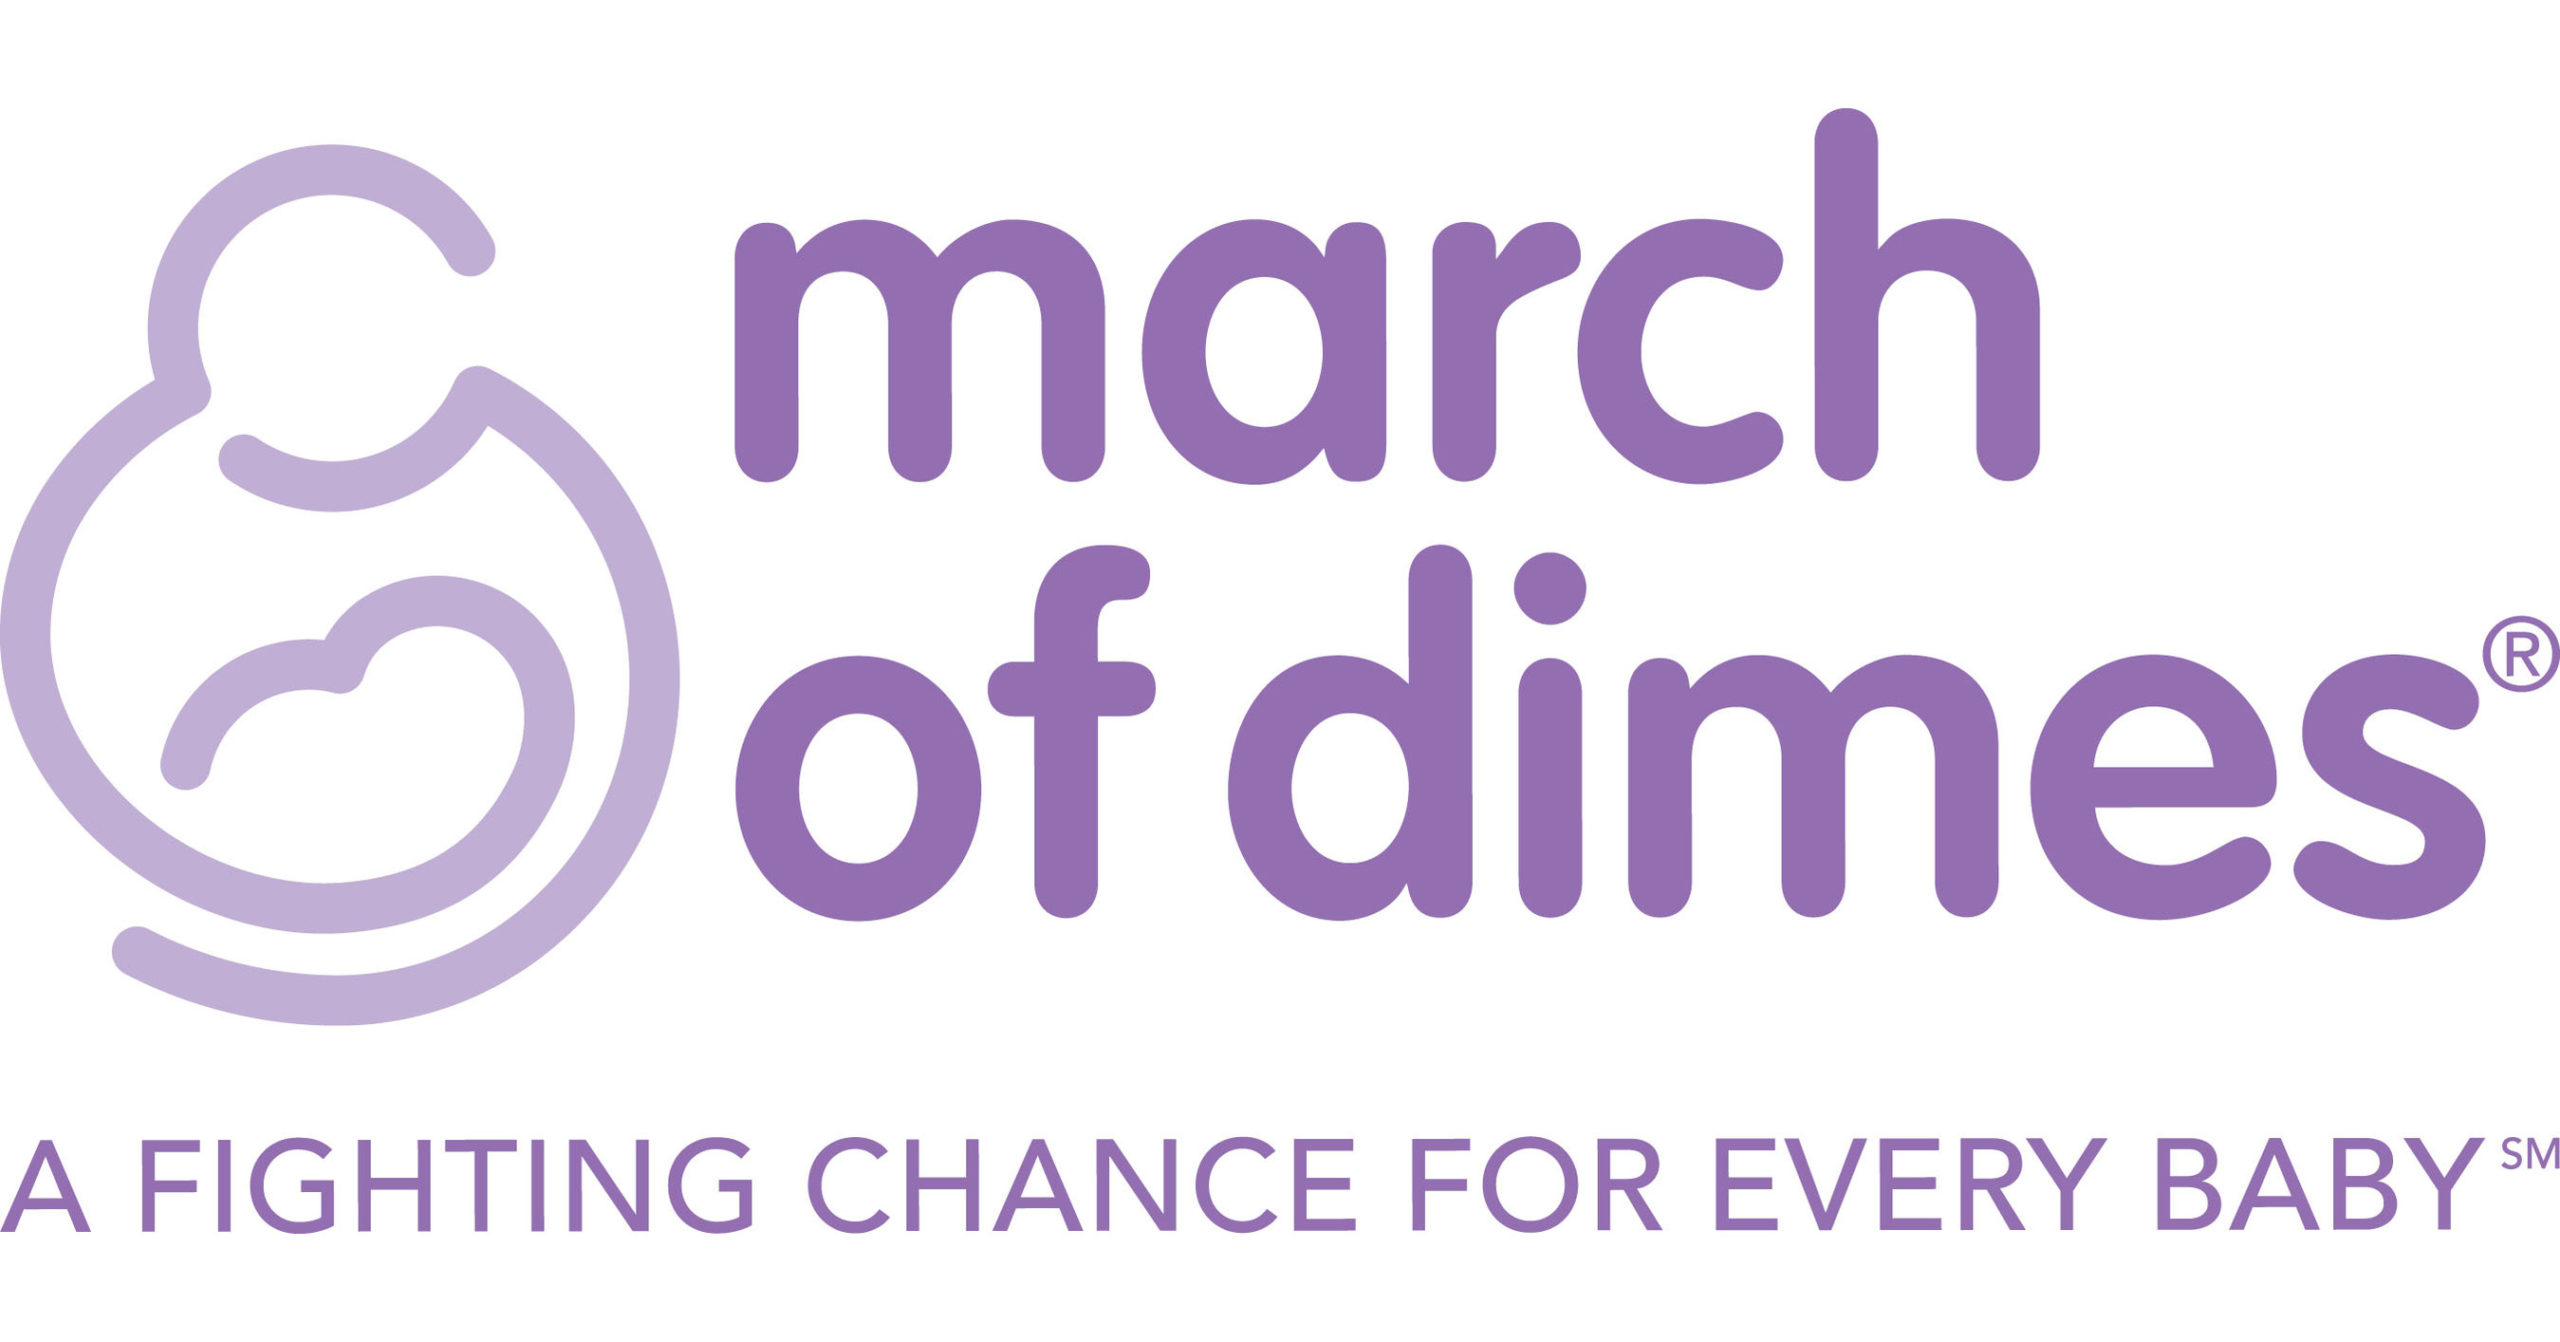 March of Dimes: Sara Zarrella Photography's Charity in 2021. Our story with the March of Dimes and our son's hospital stay